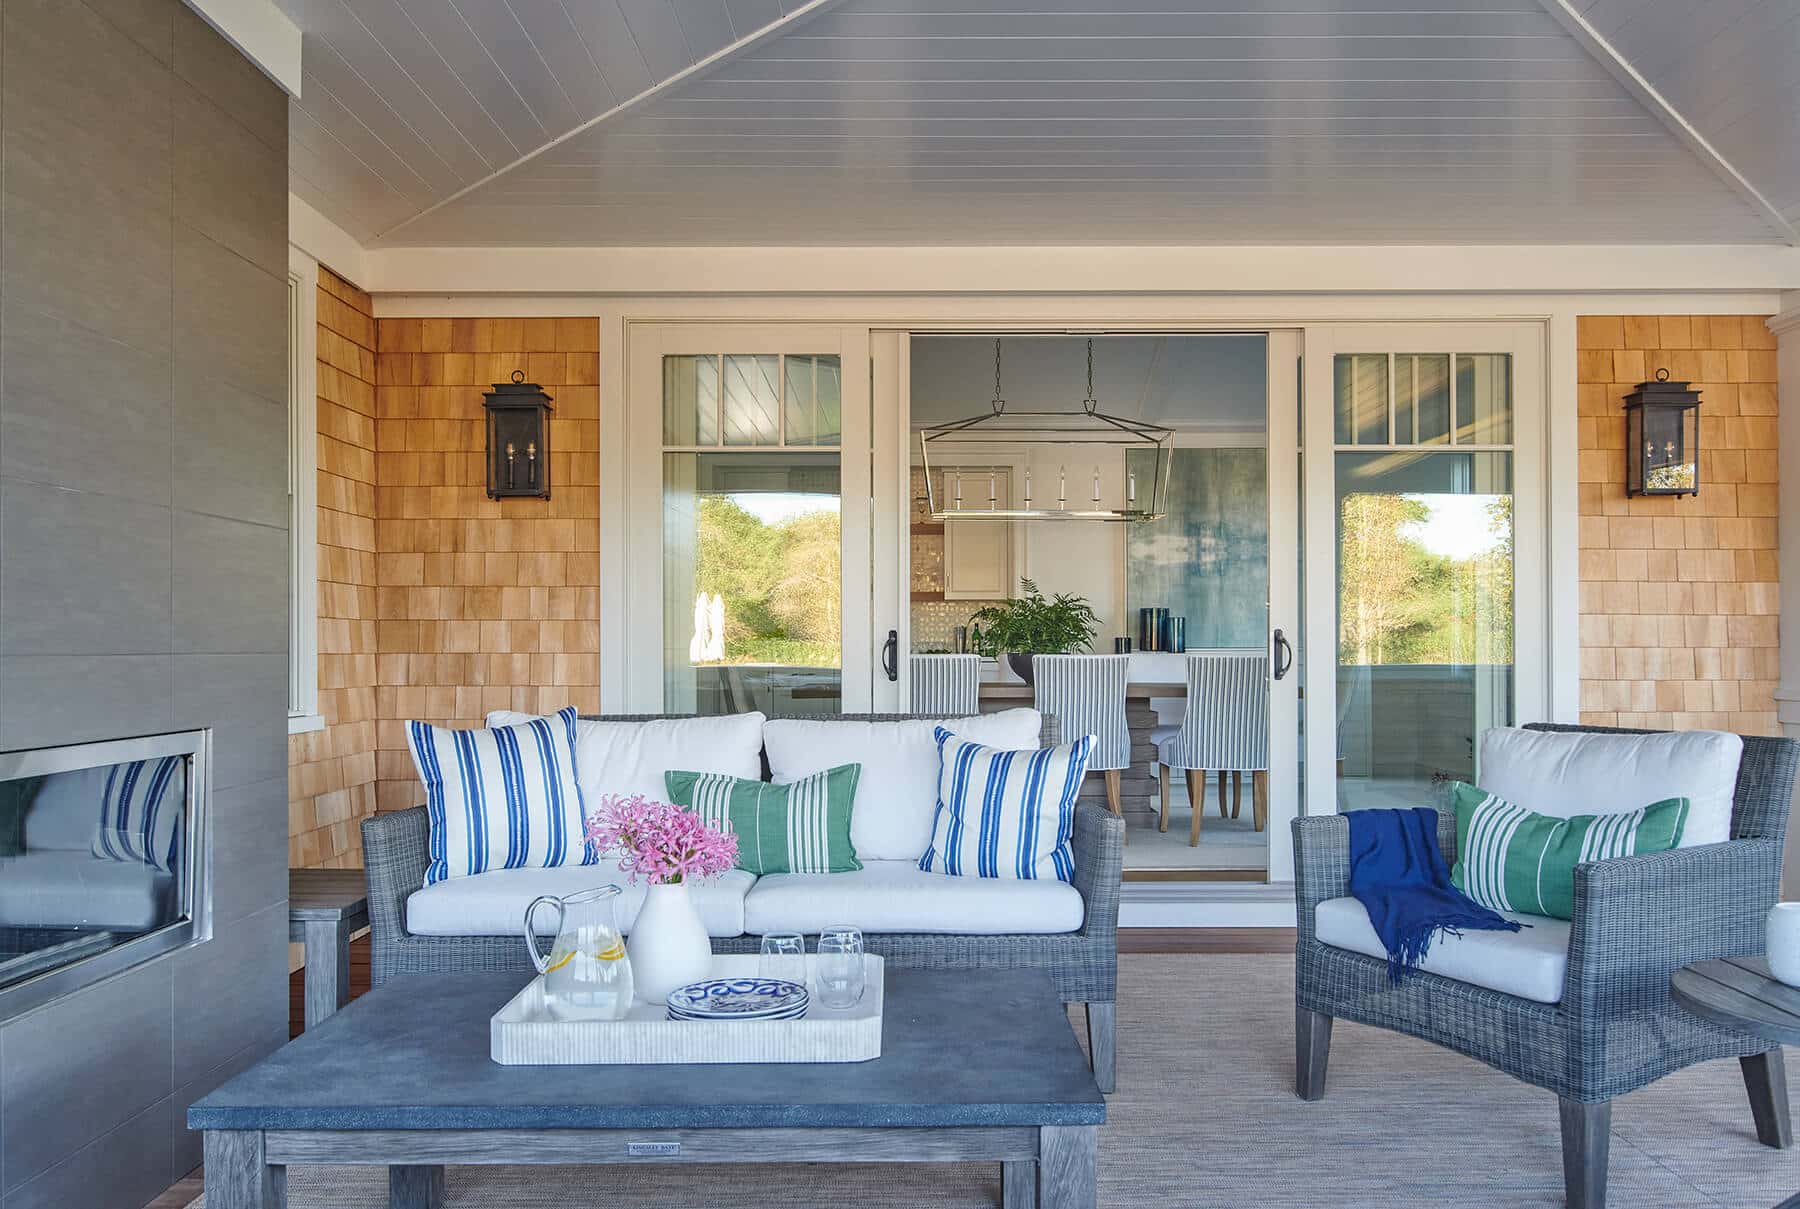 Nantucket, covered patio seating area with sliding doors to the kitchen